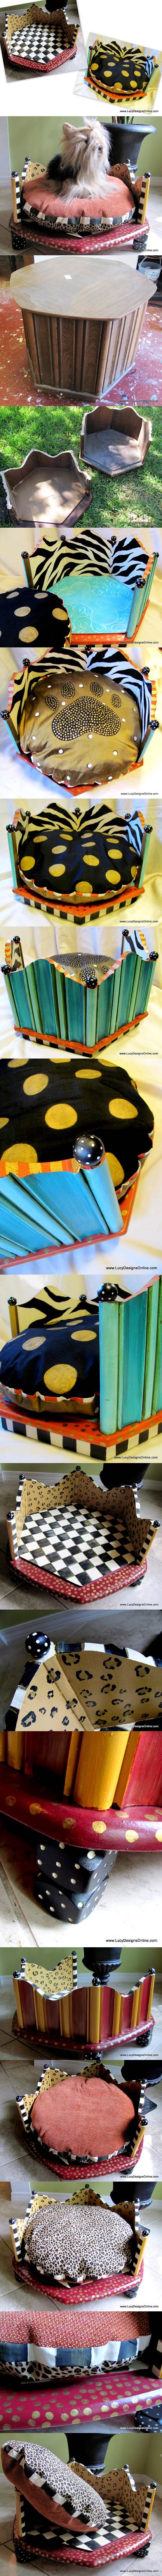 DIY Hand Painted Round Dog Beds from an End Table in Zebra and Leopard Print 2